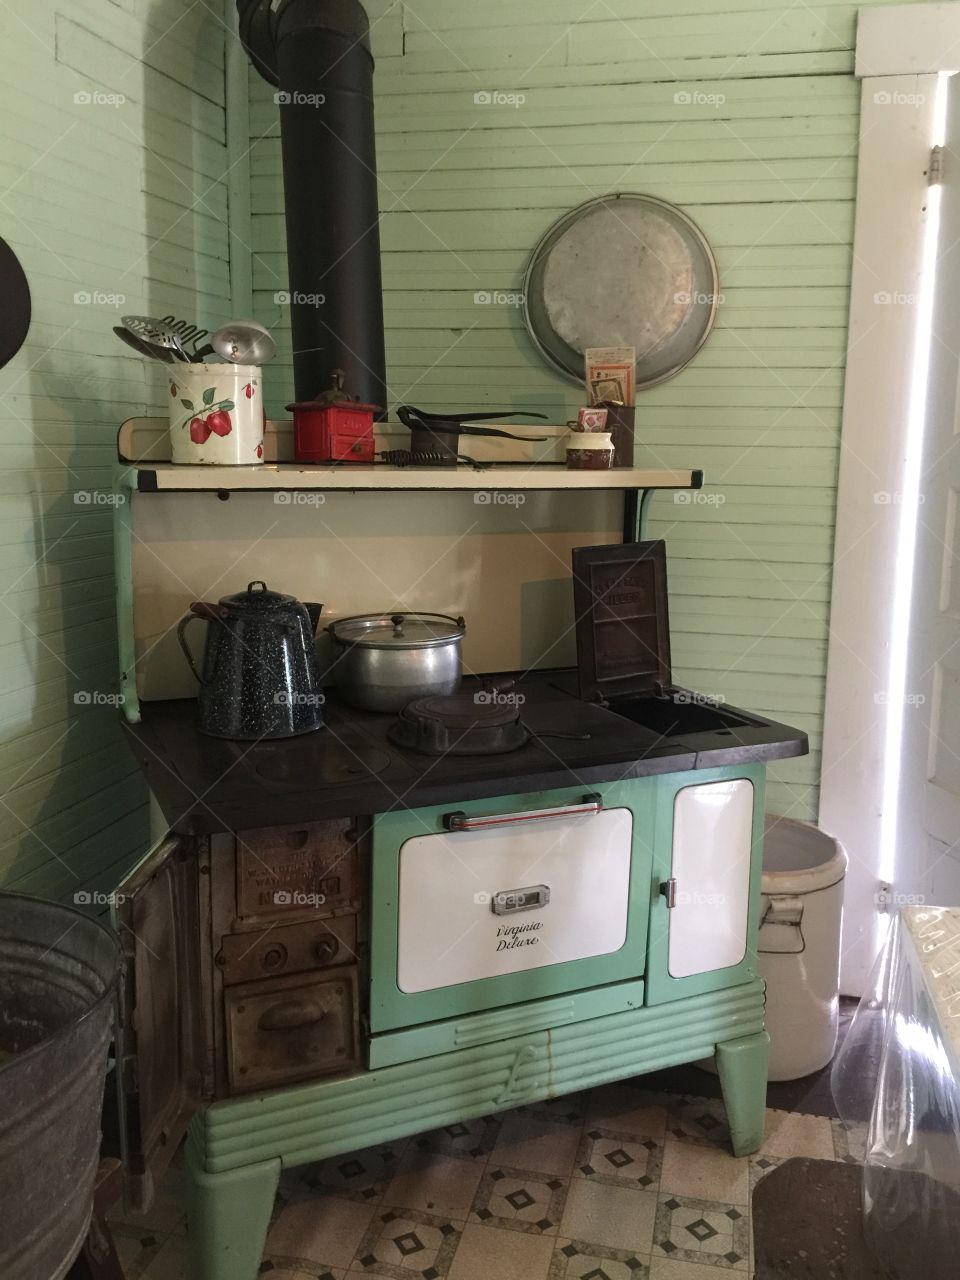 Country Cooking . An old-timey kitchen in the Beckley Coal Mine Museum.